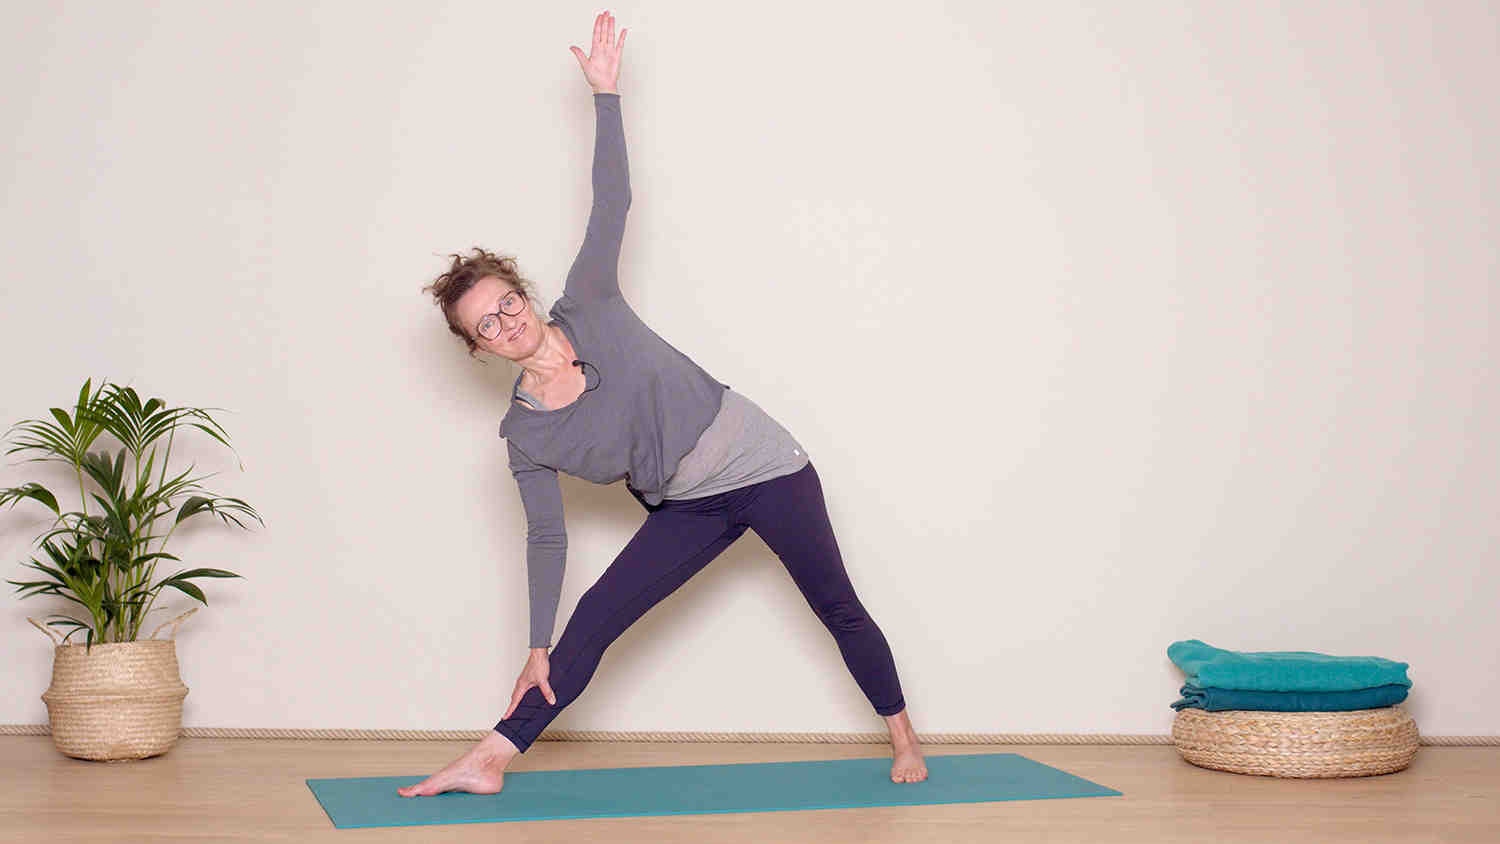 What are the three components of hatha yoga?